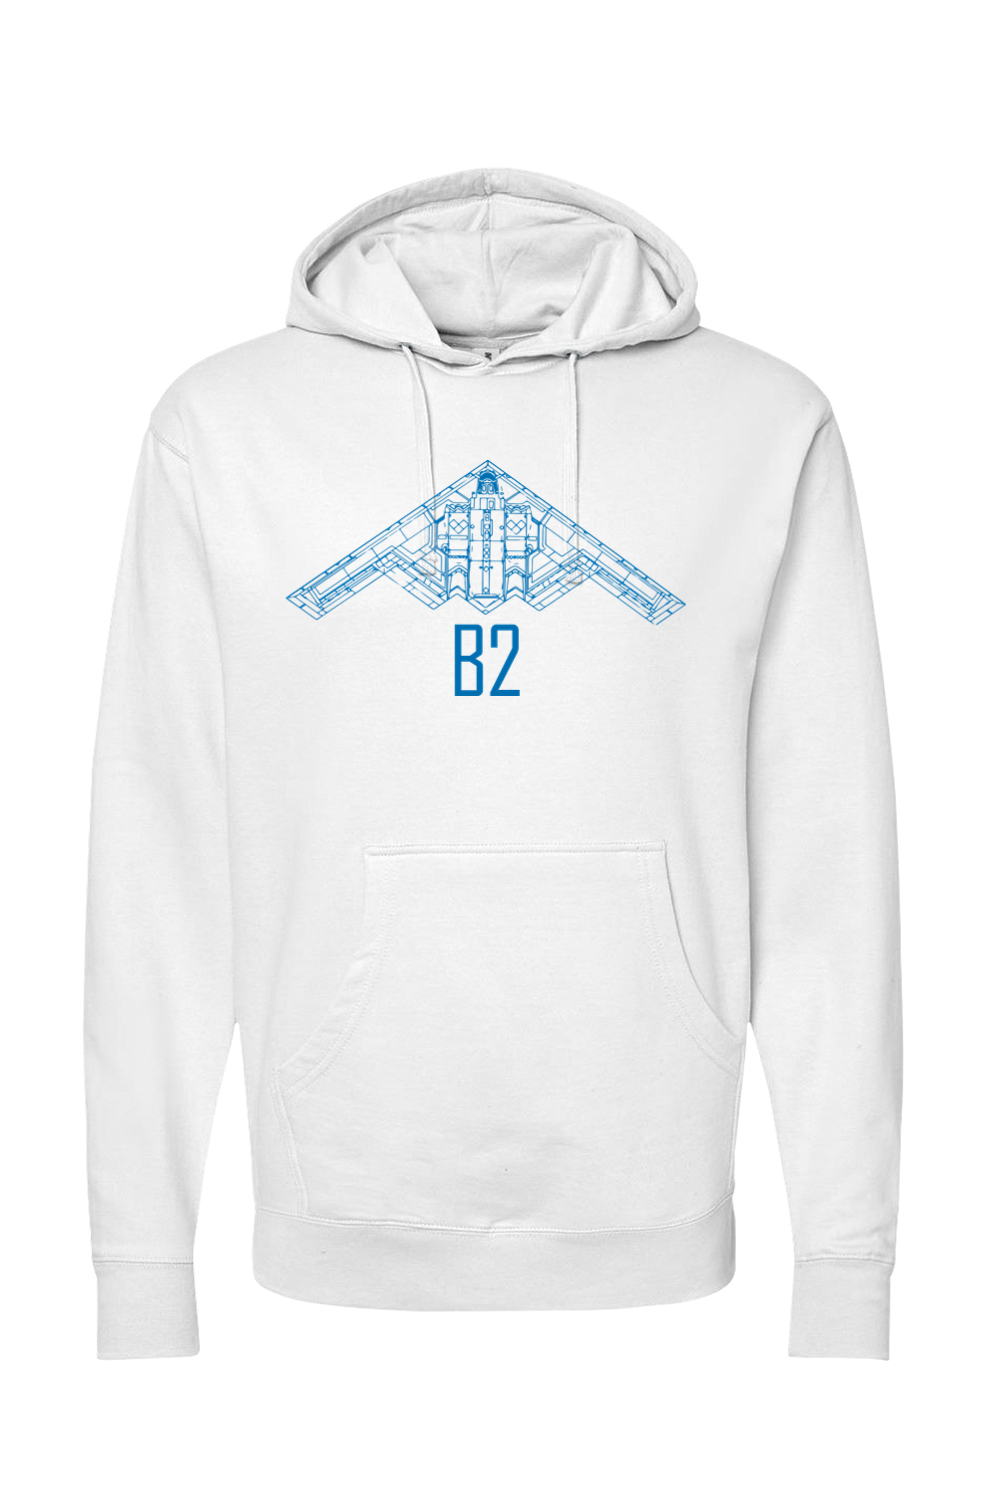 B2 Stealth Bomber - Branch 32 Midweight Hoodie